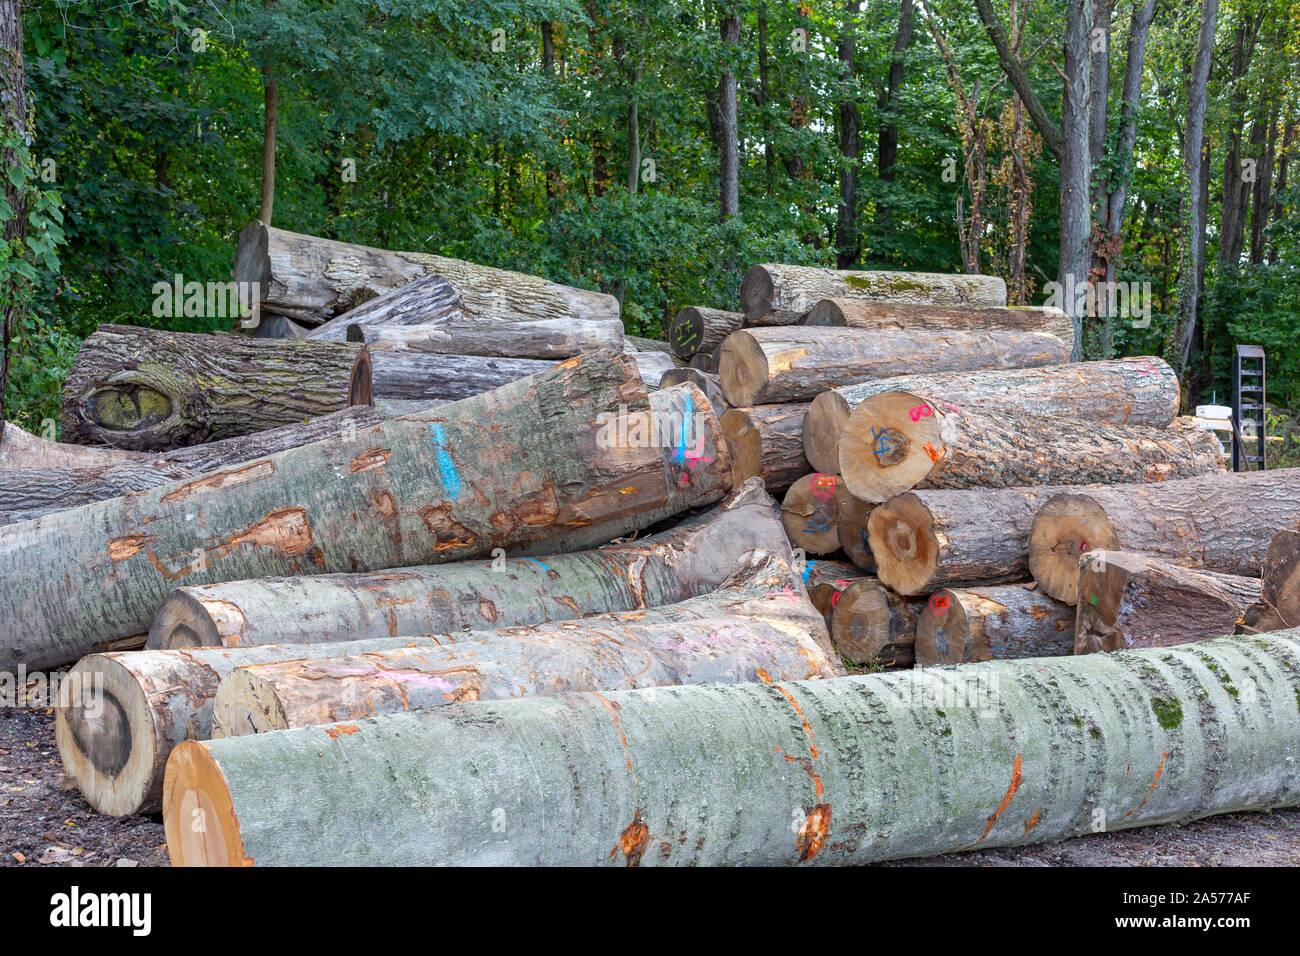 Holland, Michigan - Logs delivered to the Holland Bowl Mill, which turns logs into bowls and other wood products. Stock Photo